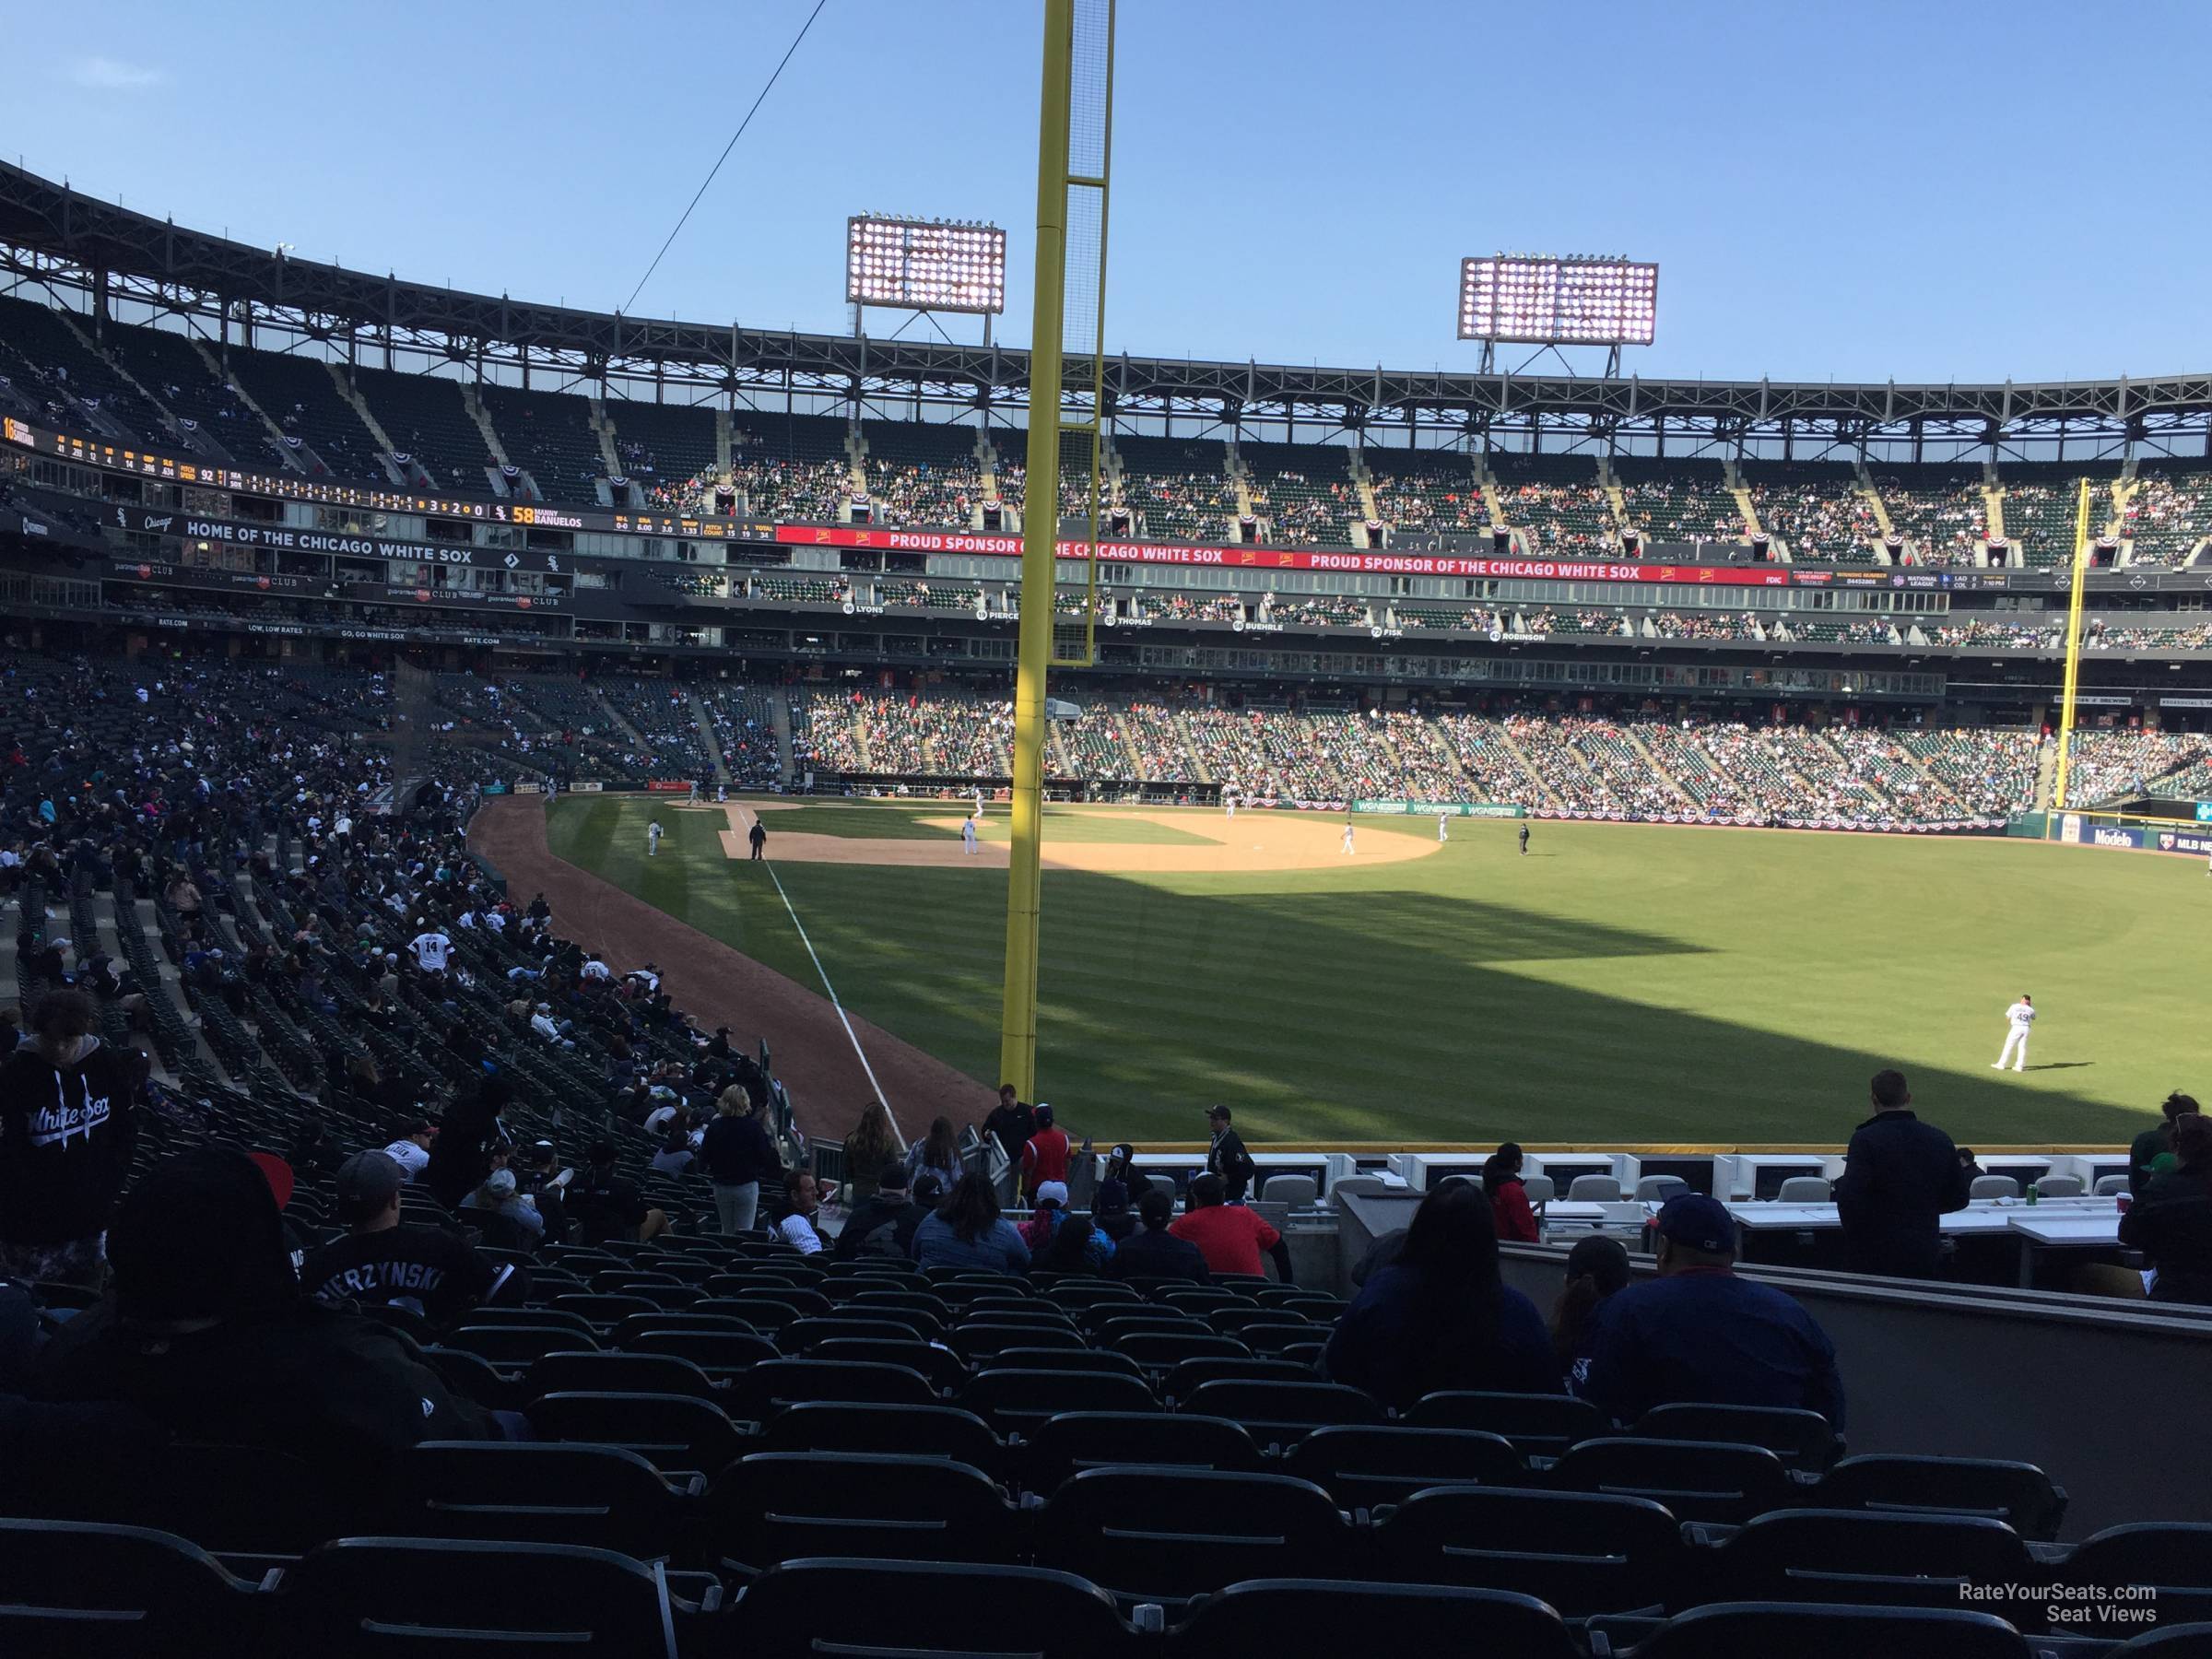 section 108, row 20 seat view  - guaranteed rate field